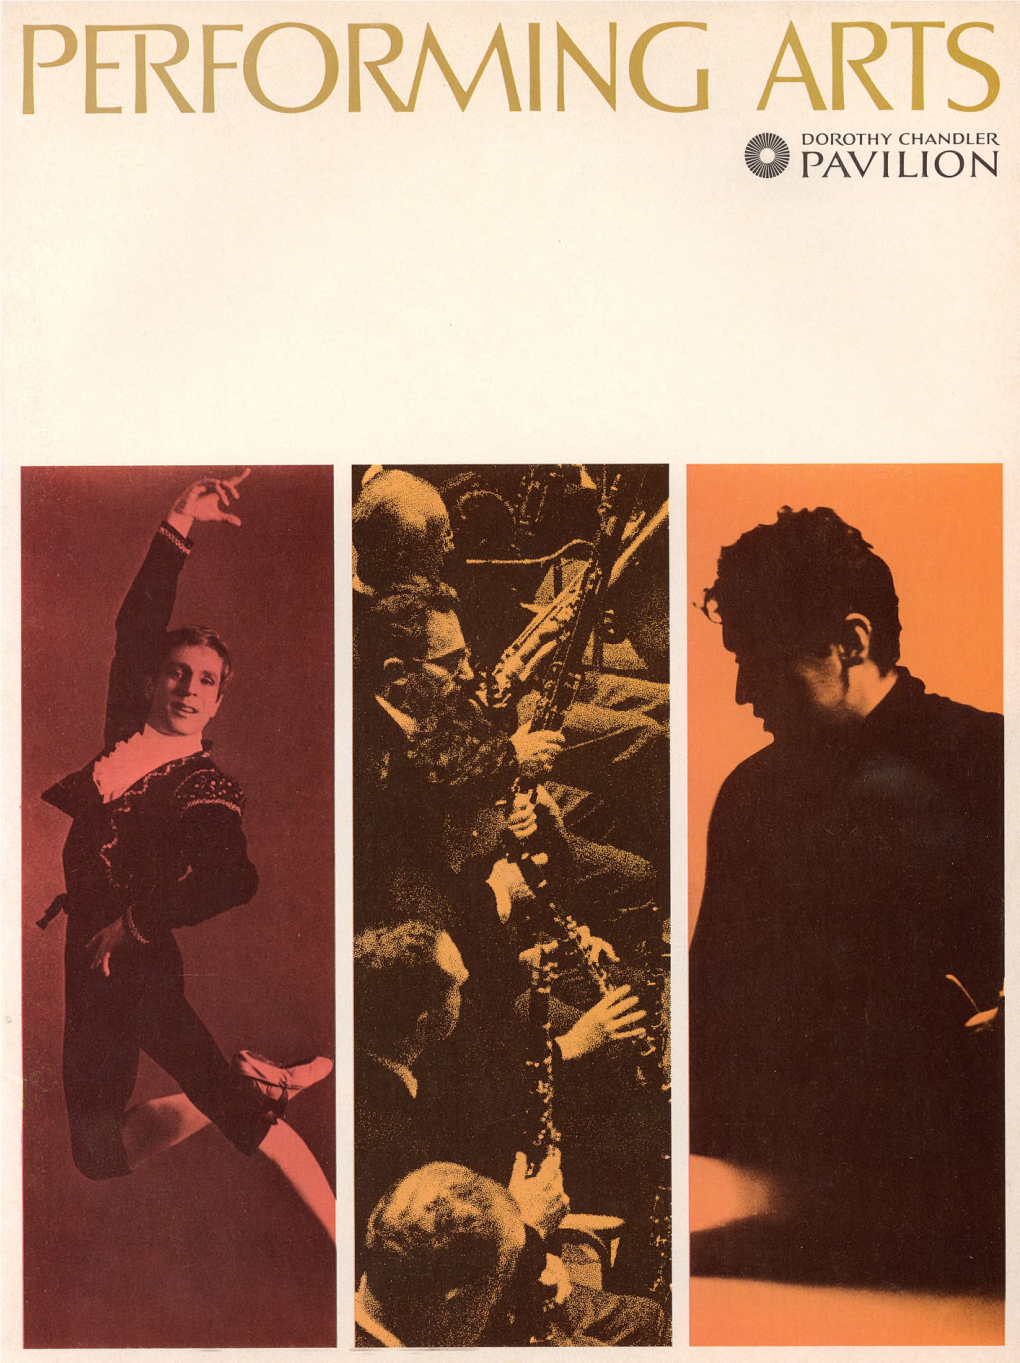 Performing Arts Dorothy Chandler W Pavilion Performing Arts the Music Center Monthly March 1968 / Vol